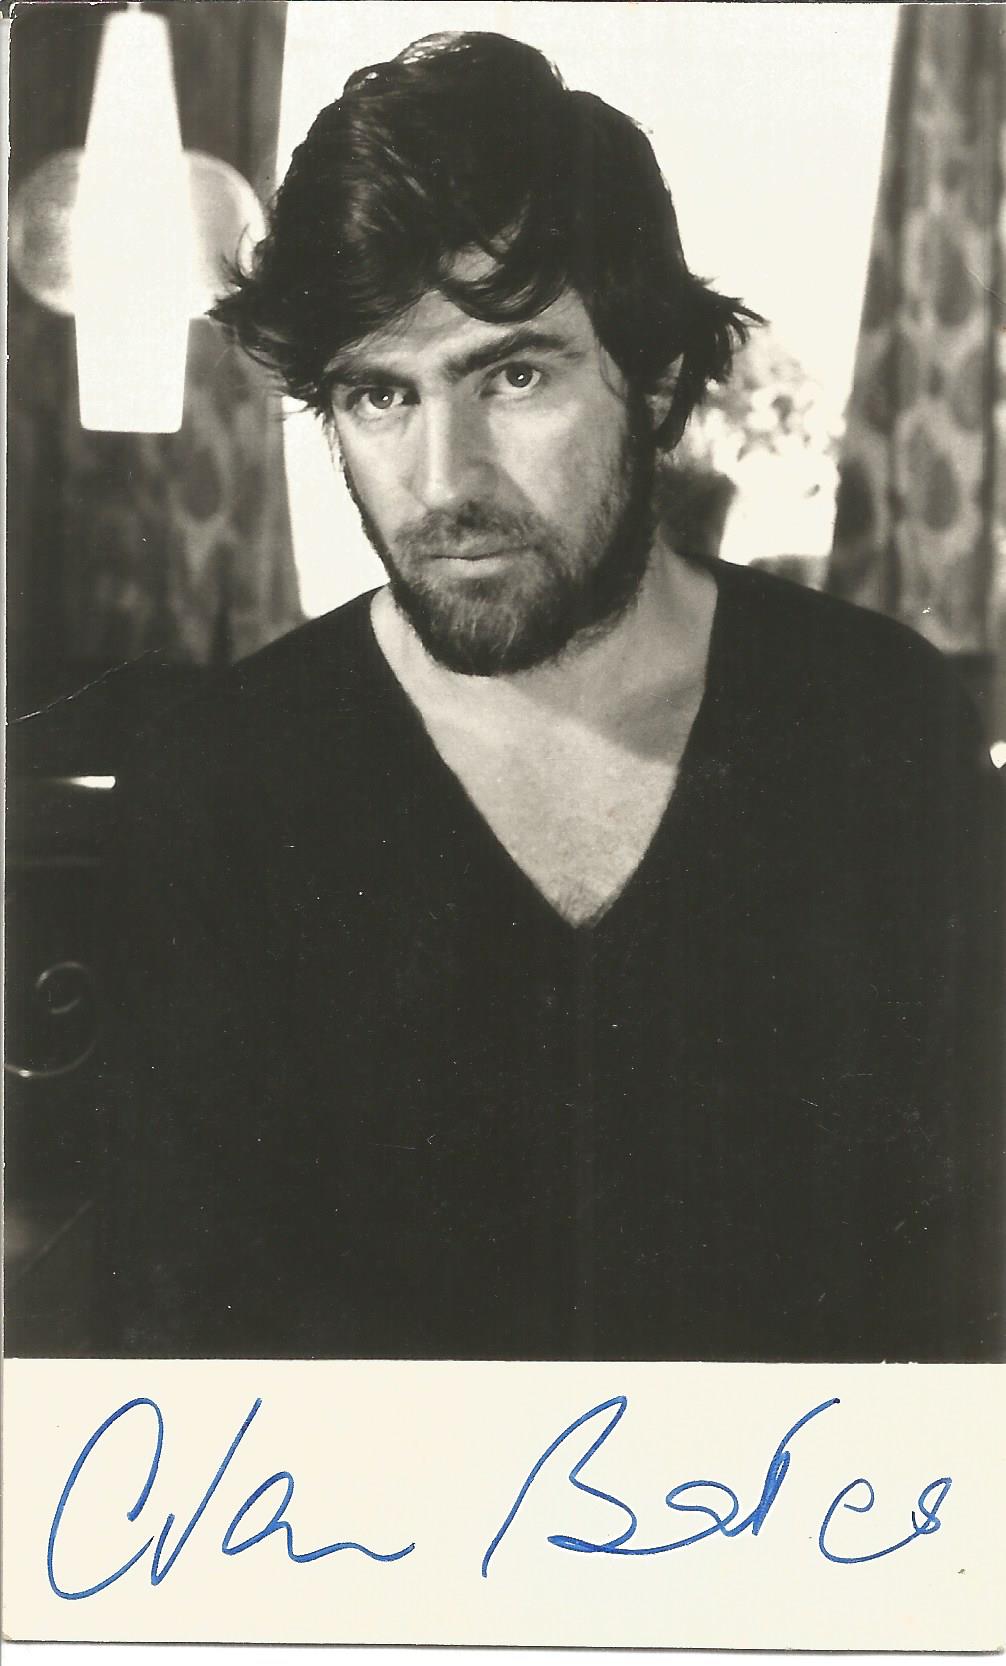 Alan Bates signed 6x4 black and white photograph. Bates was an English actor who came to